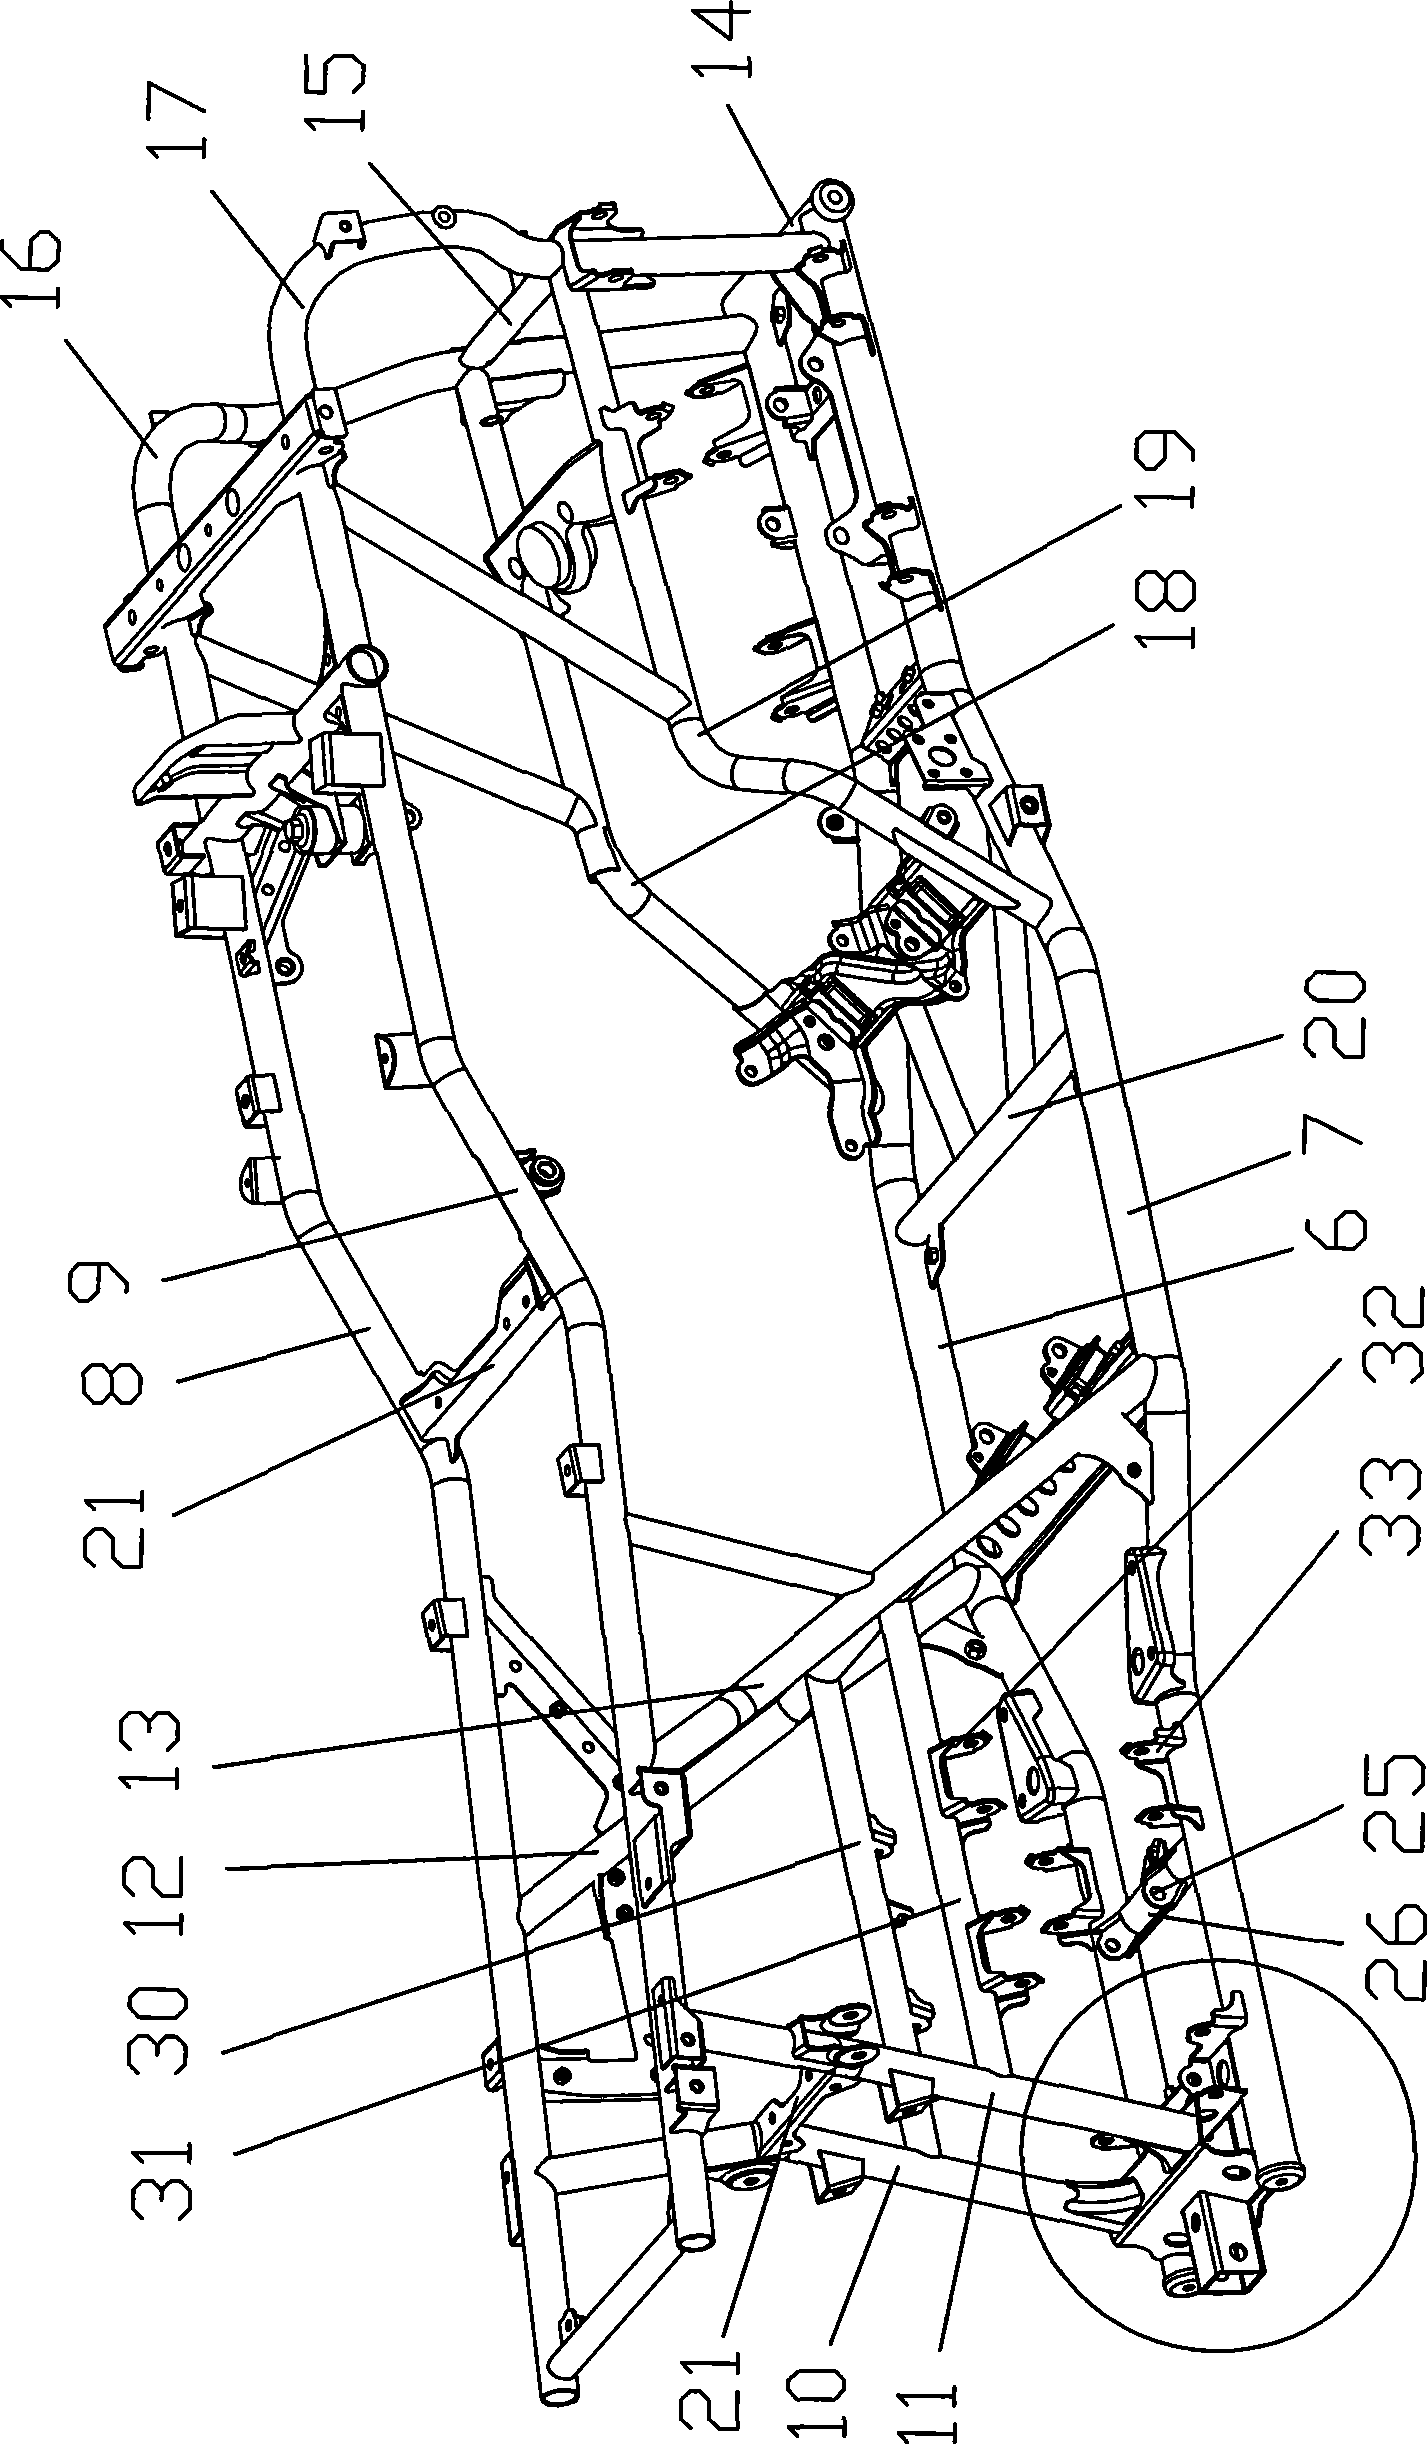 Frame assembly of all-terrain vehicle